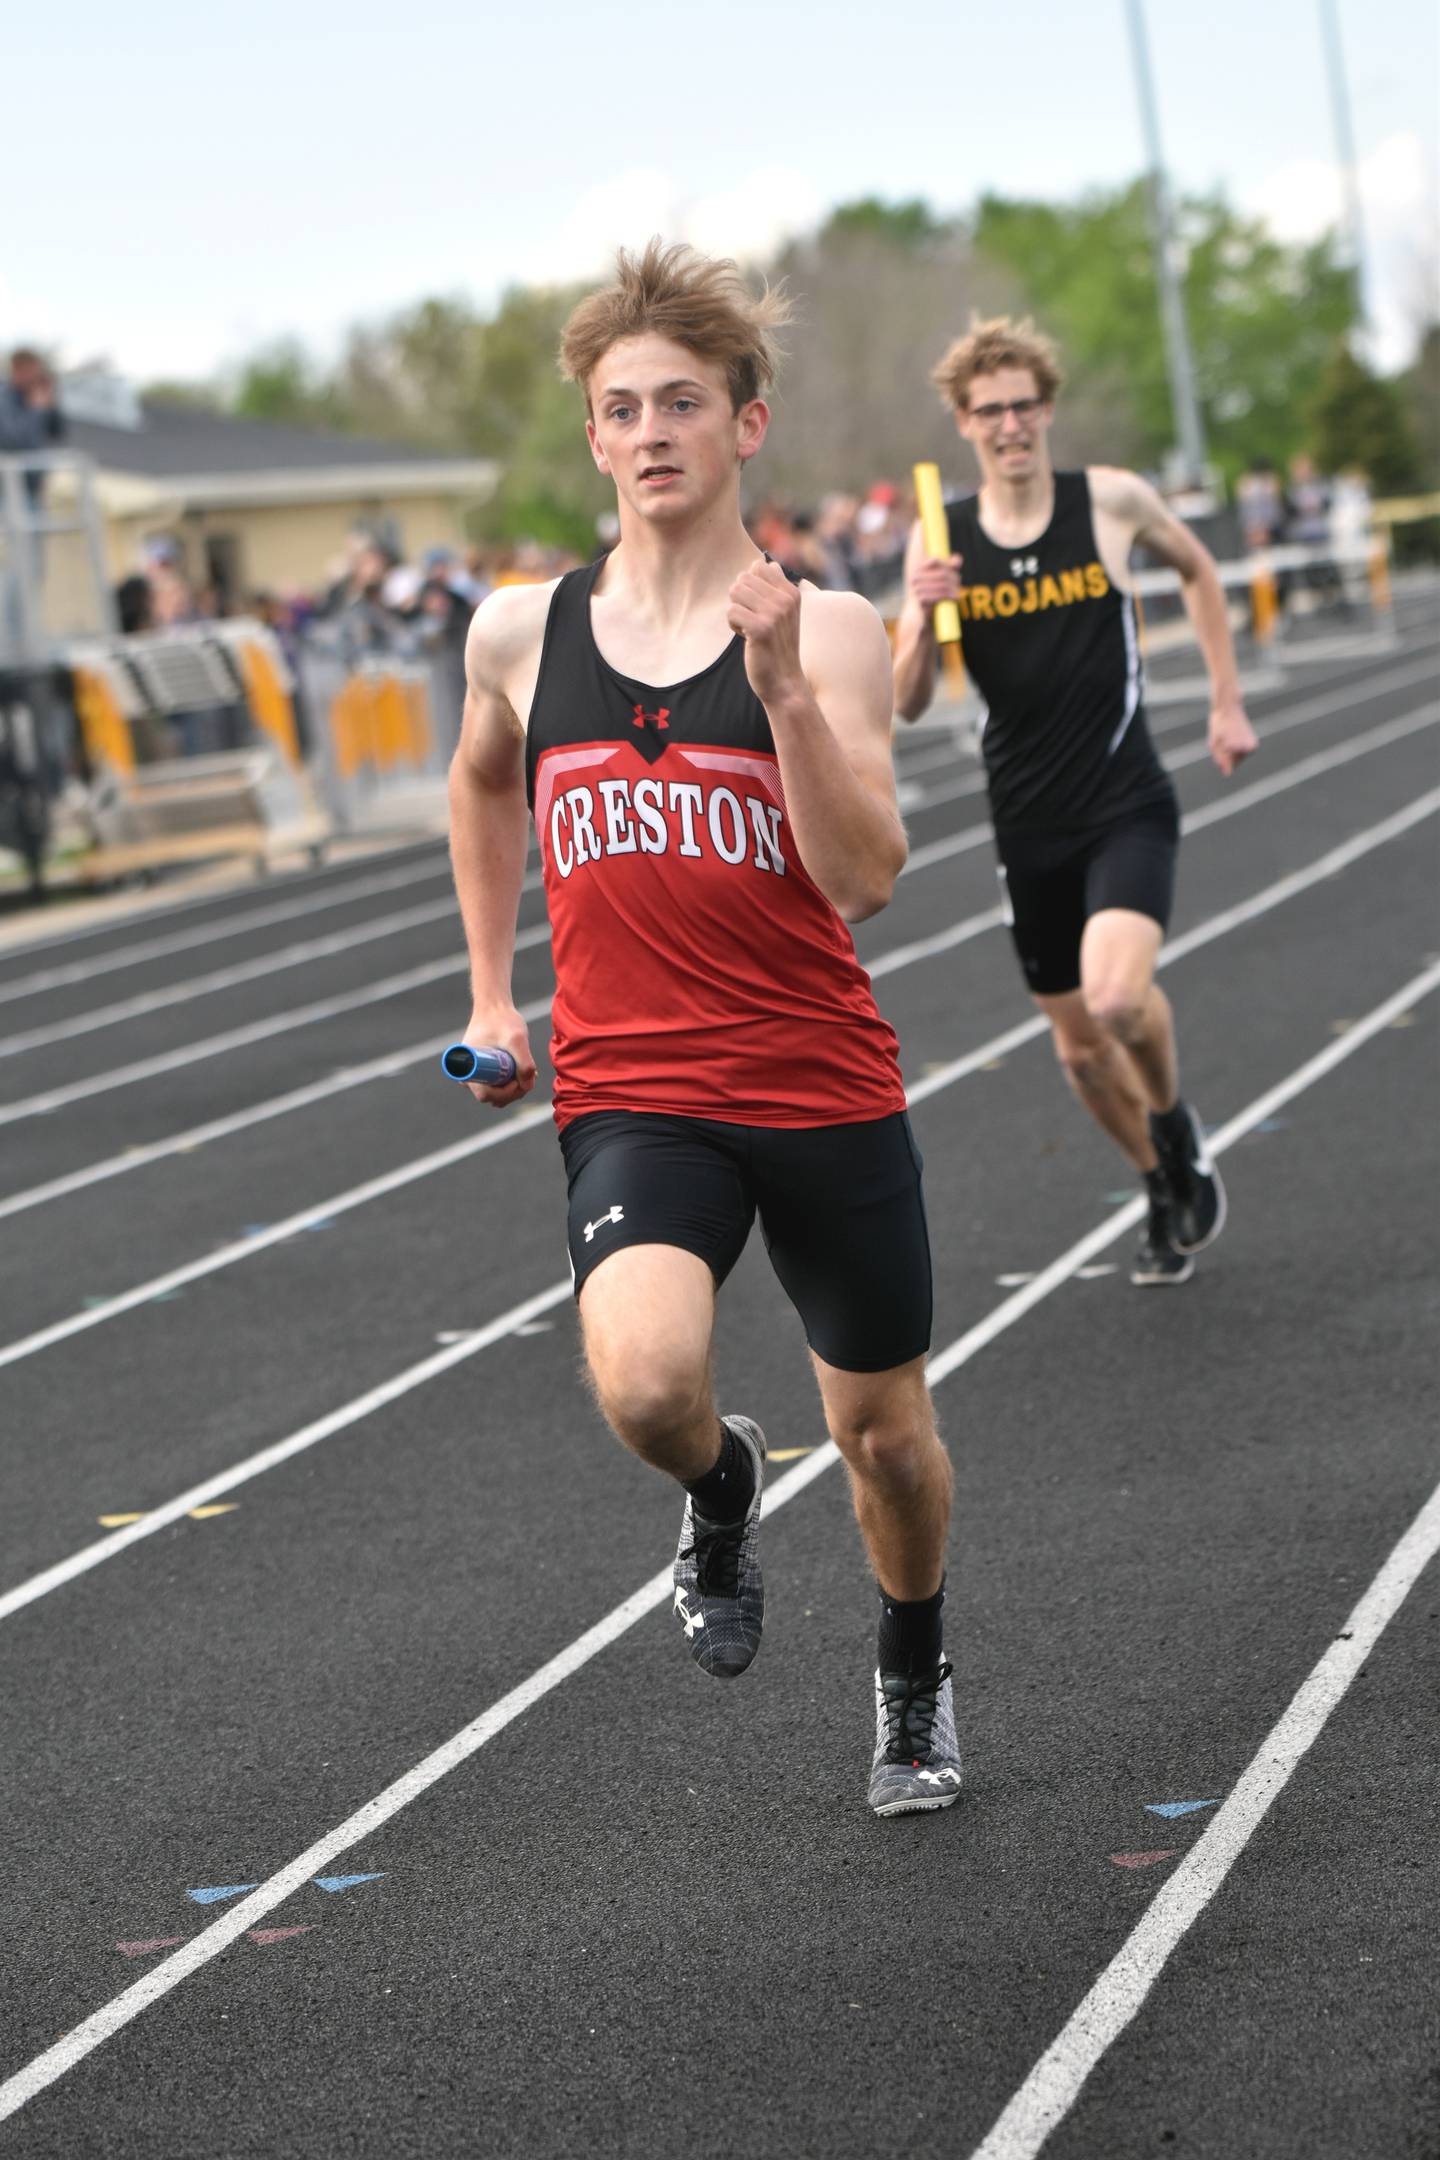 Creston freshman Davin Wallace comes down the final stretch in the boys 4x800m relay ahead of the Atlantic anchor. The 4x800 is one of three relays in which the boys qualified for state.